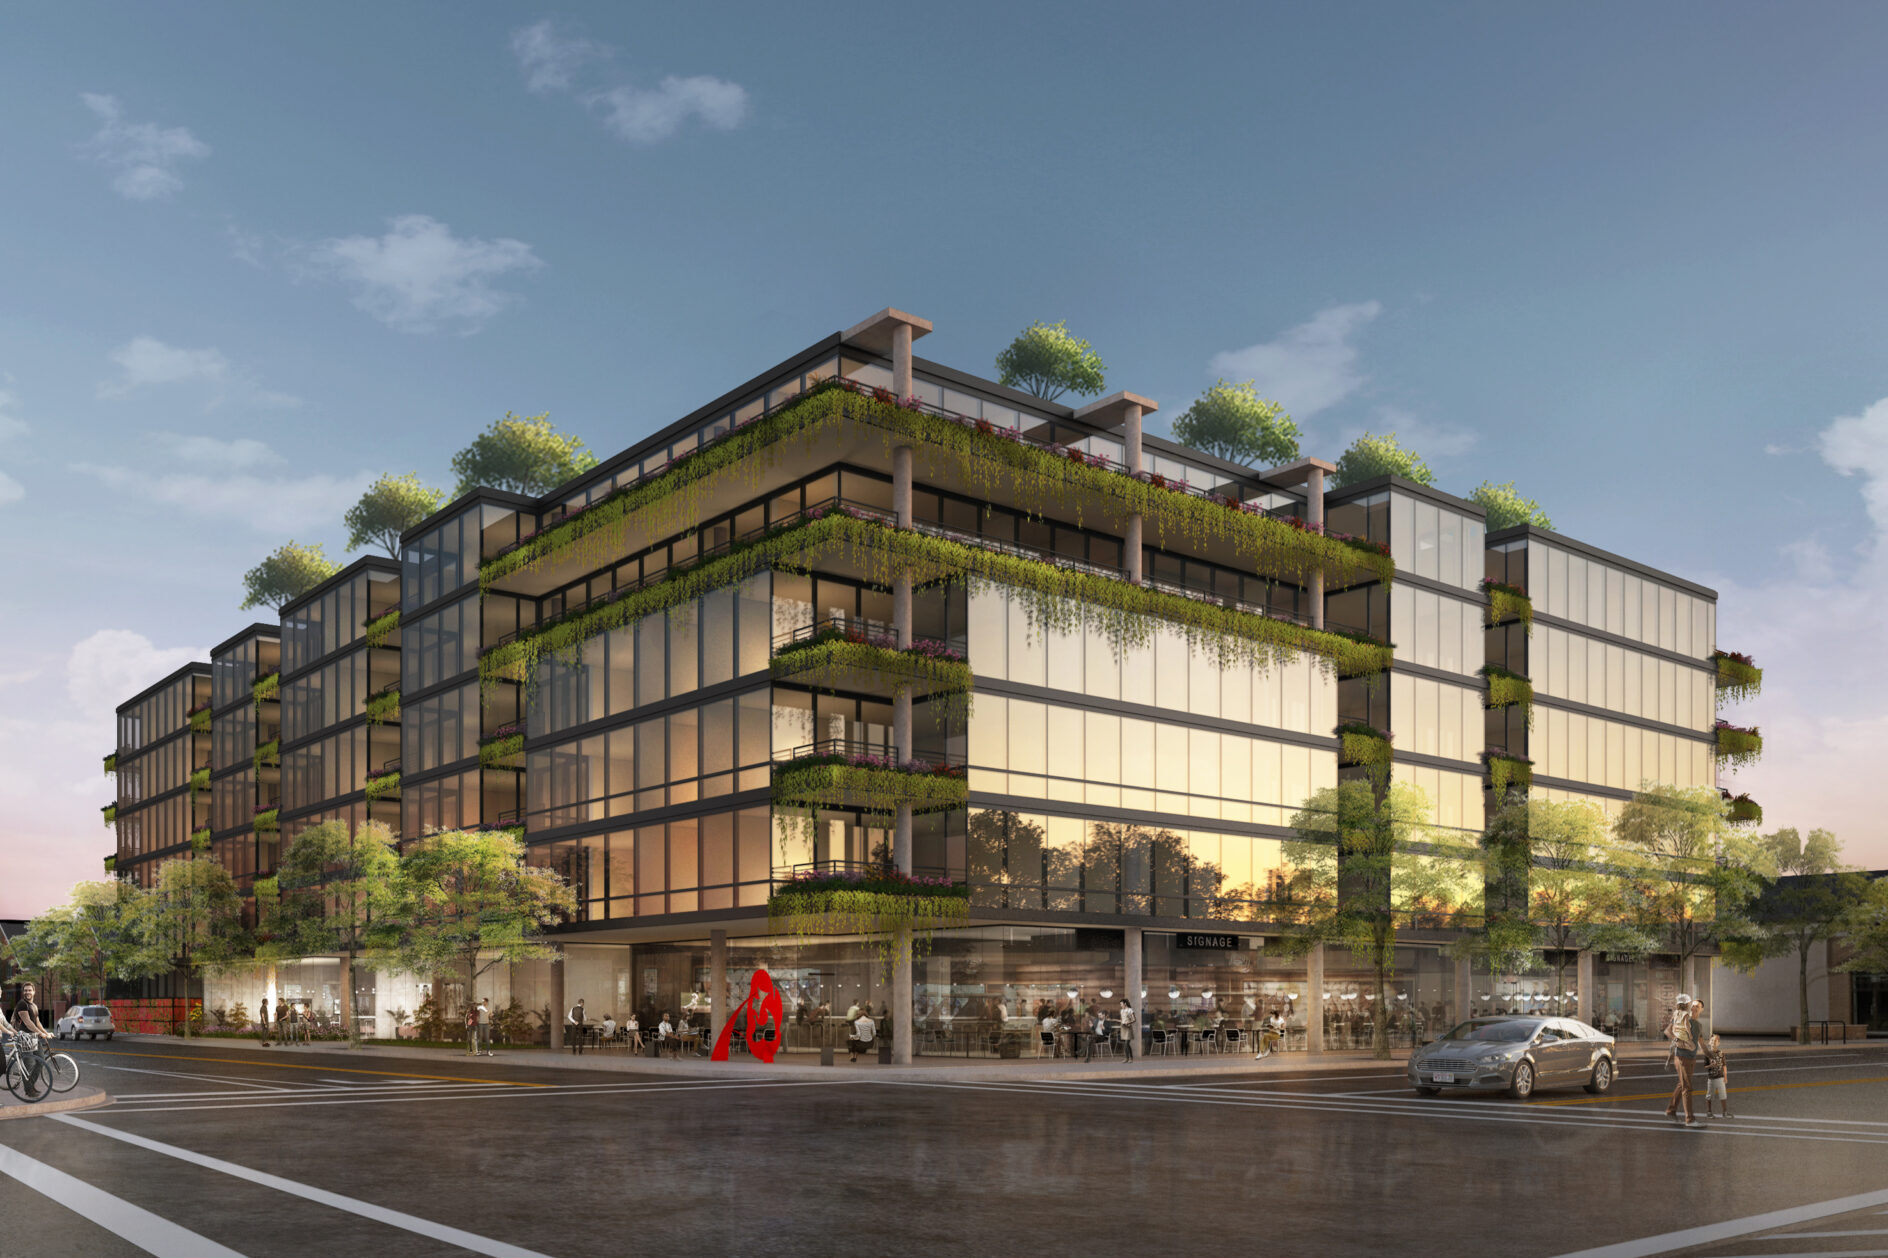 Optima wins approval for mixed-use Wilmette project